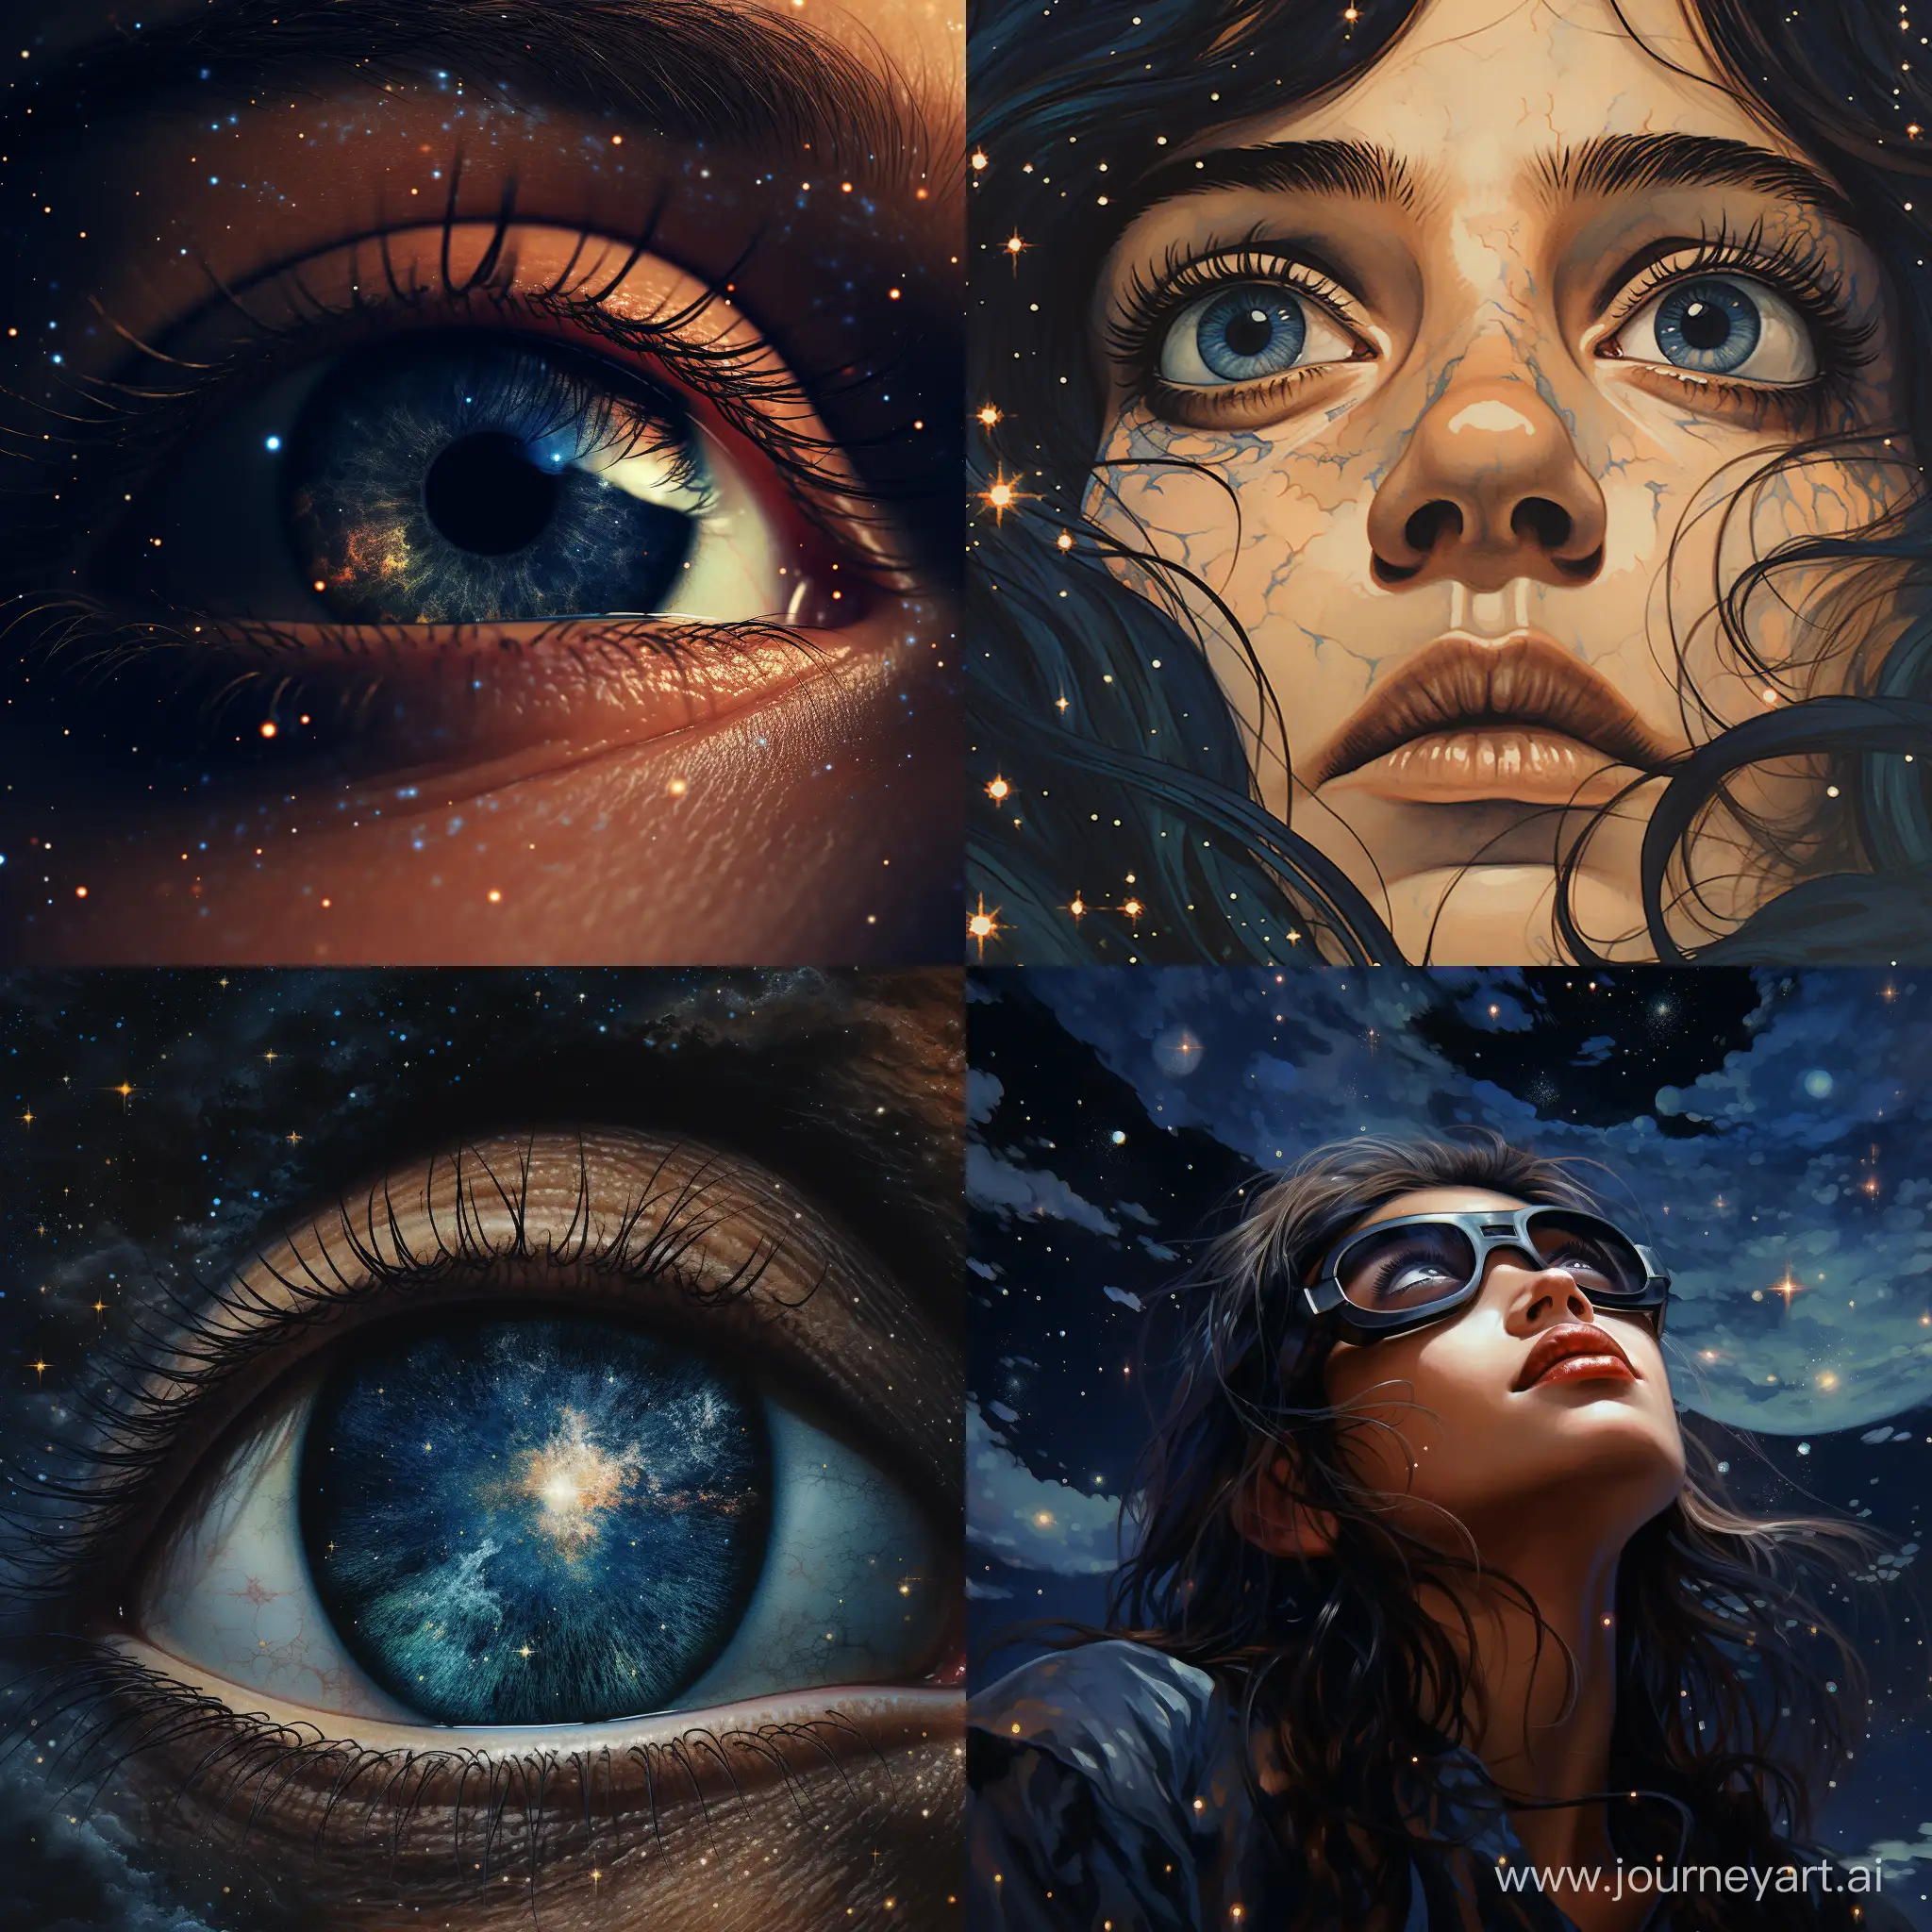 Look up to the stars, they're eyes